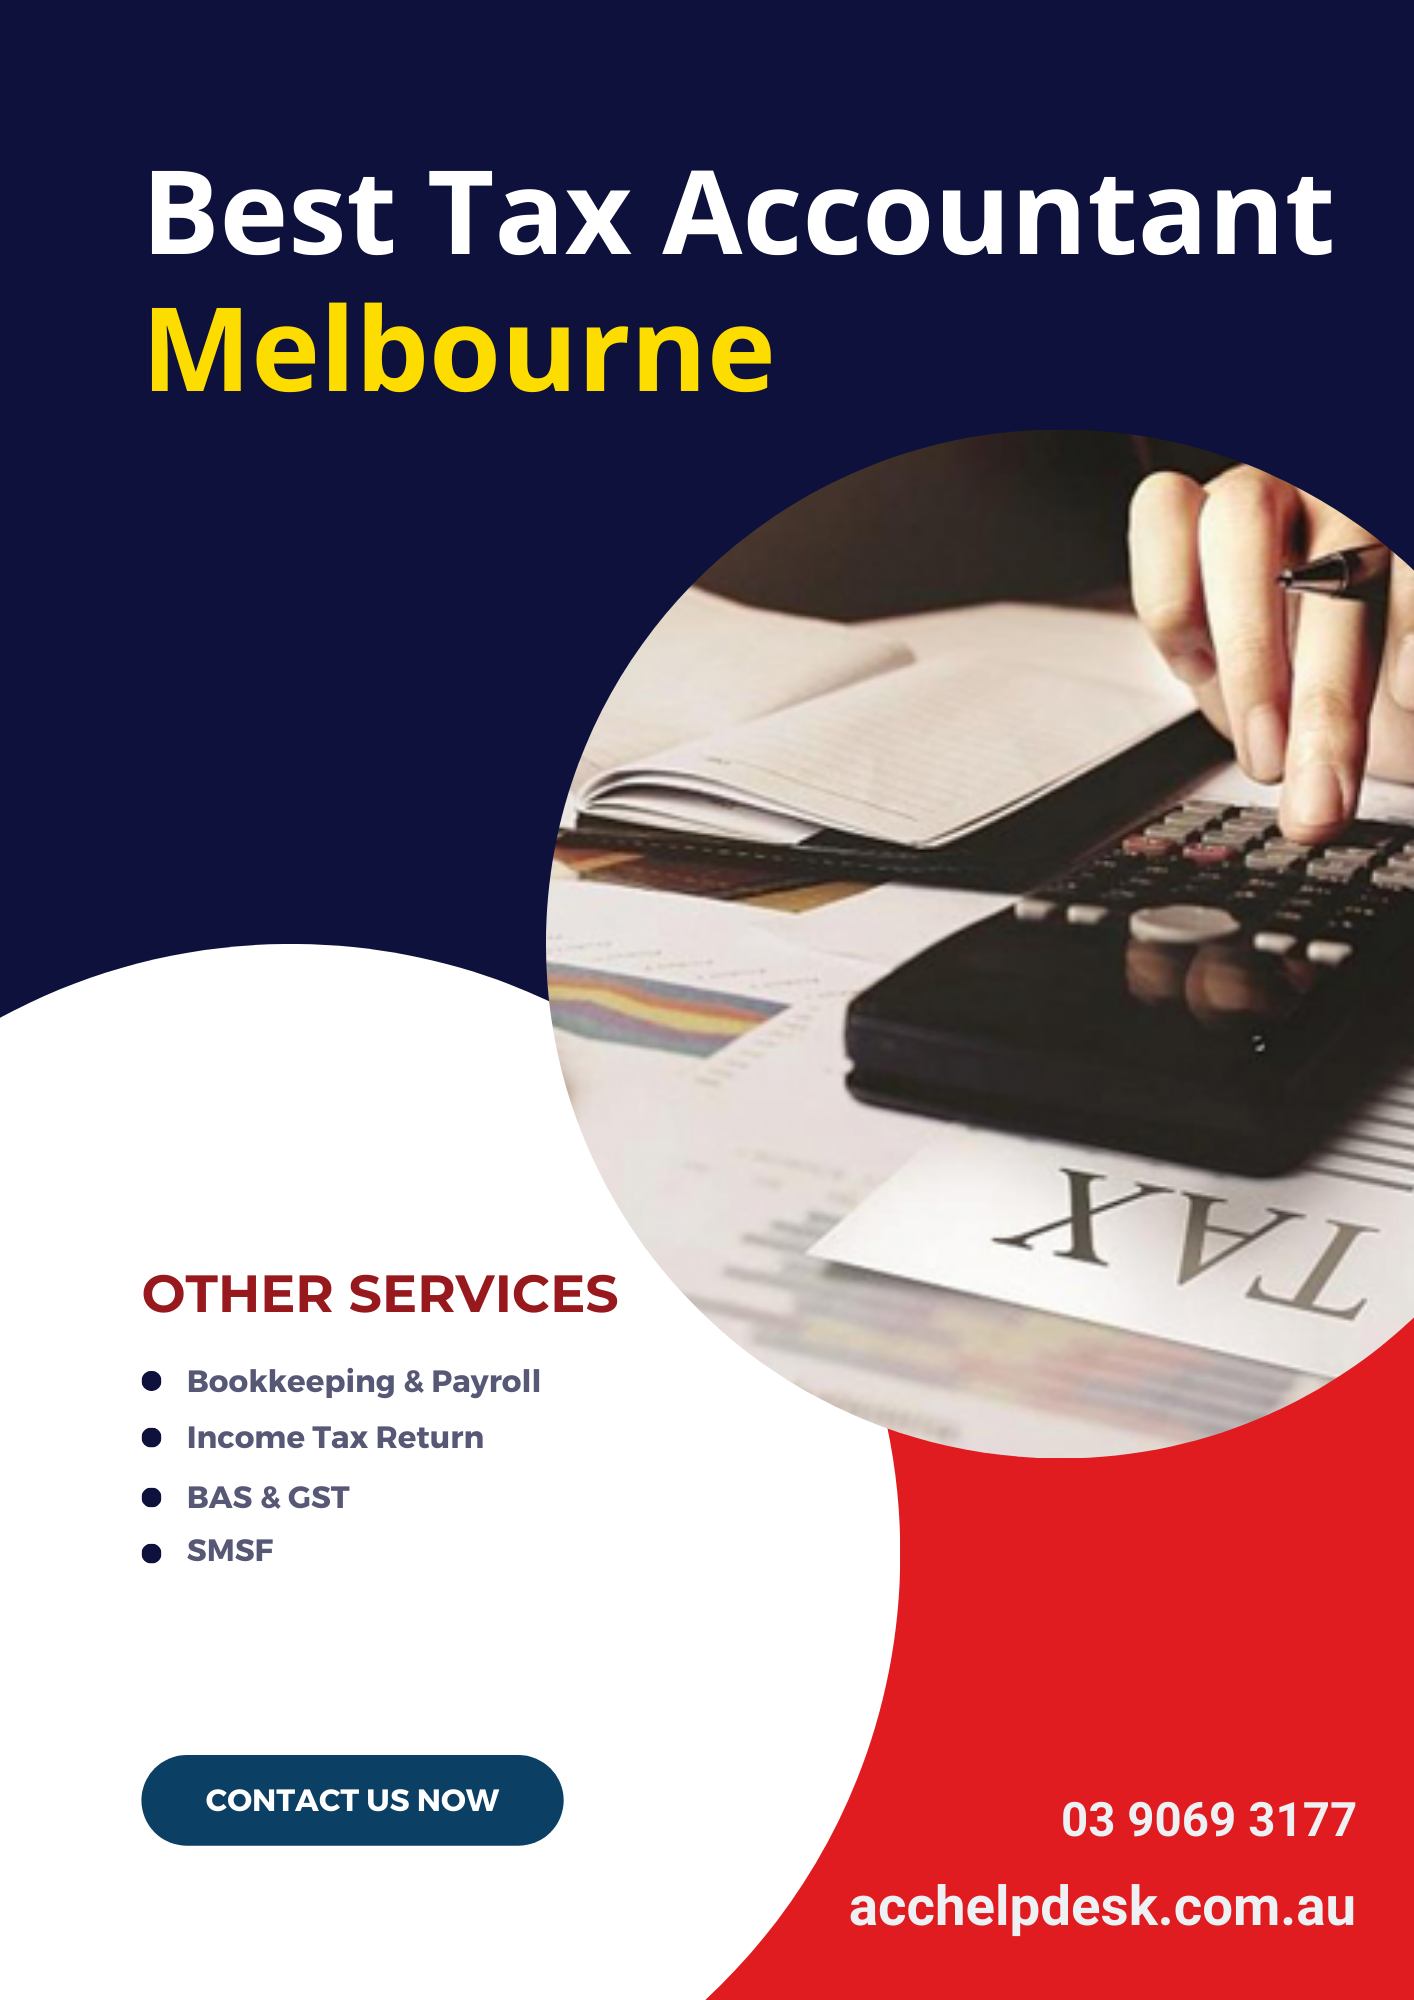 Best Tax Accountant Melbourne